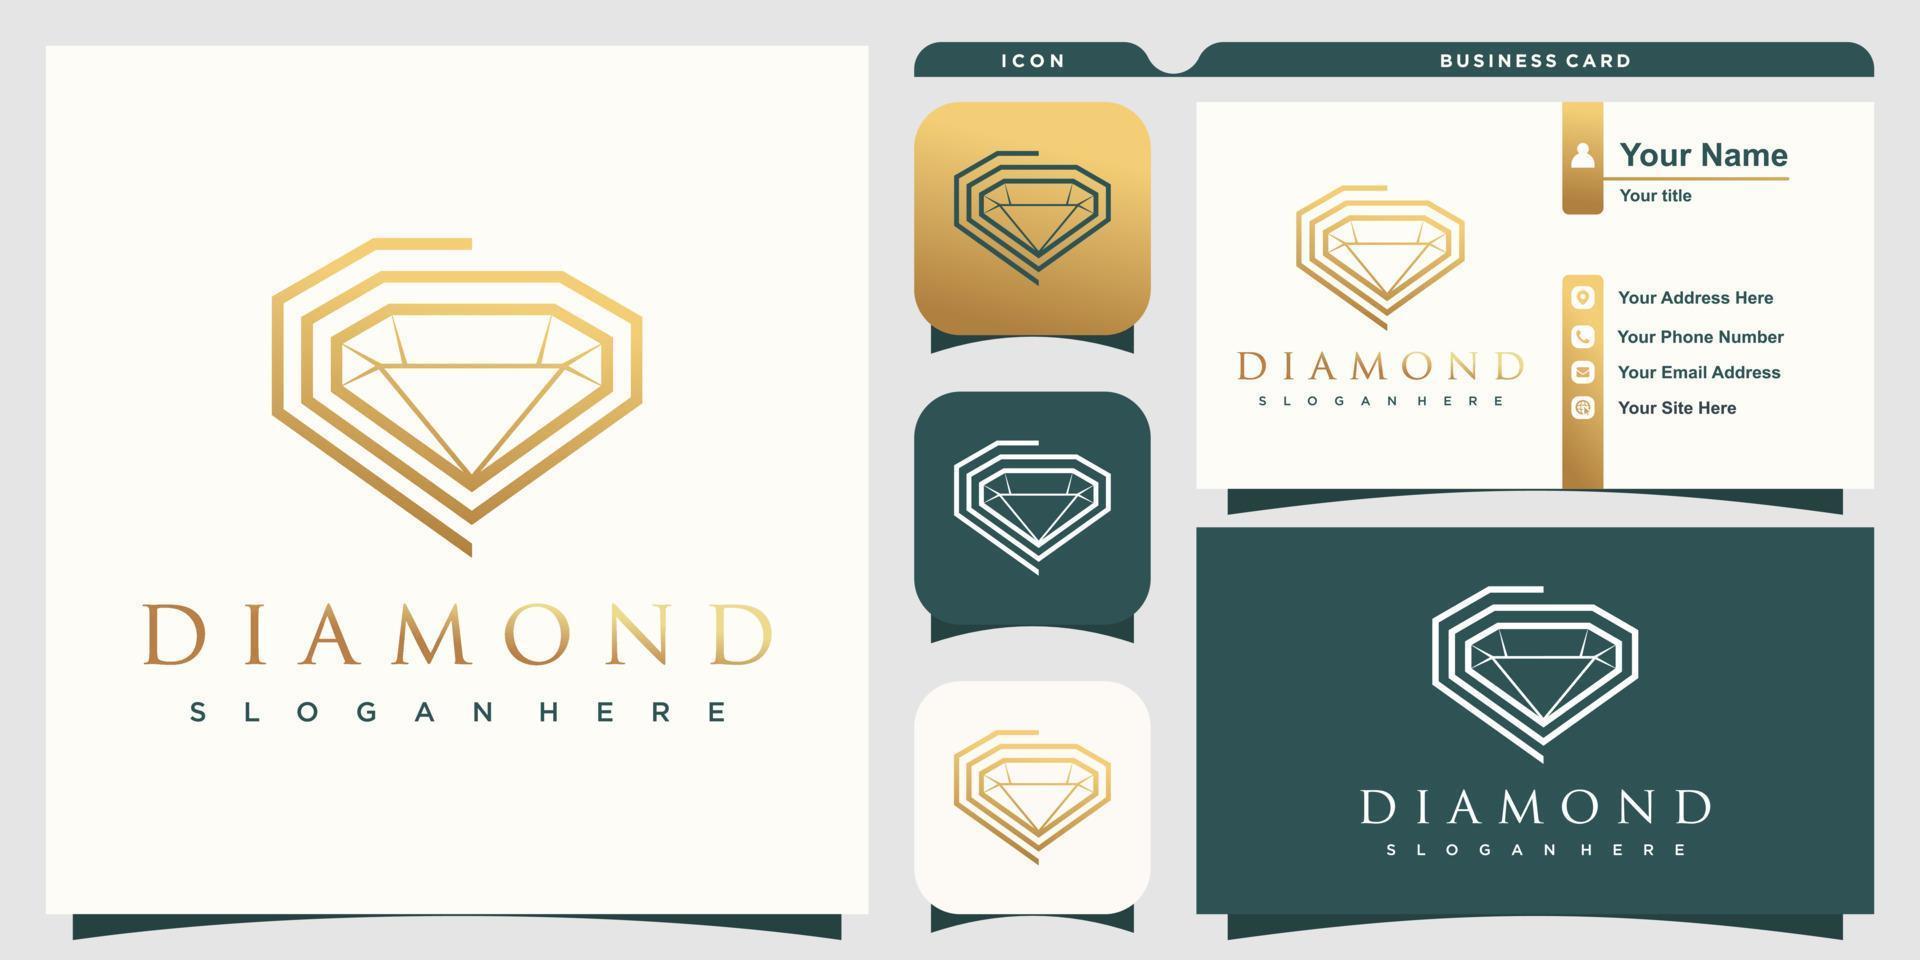 Diamond logo with creative design with business card template vector